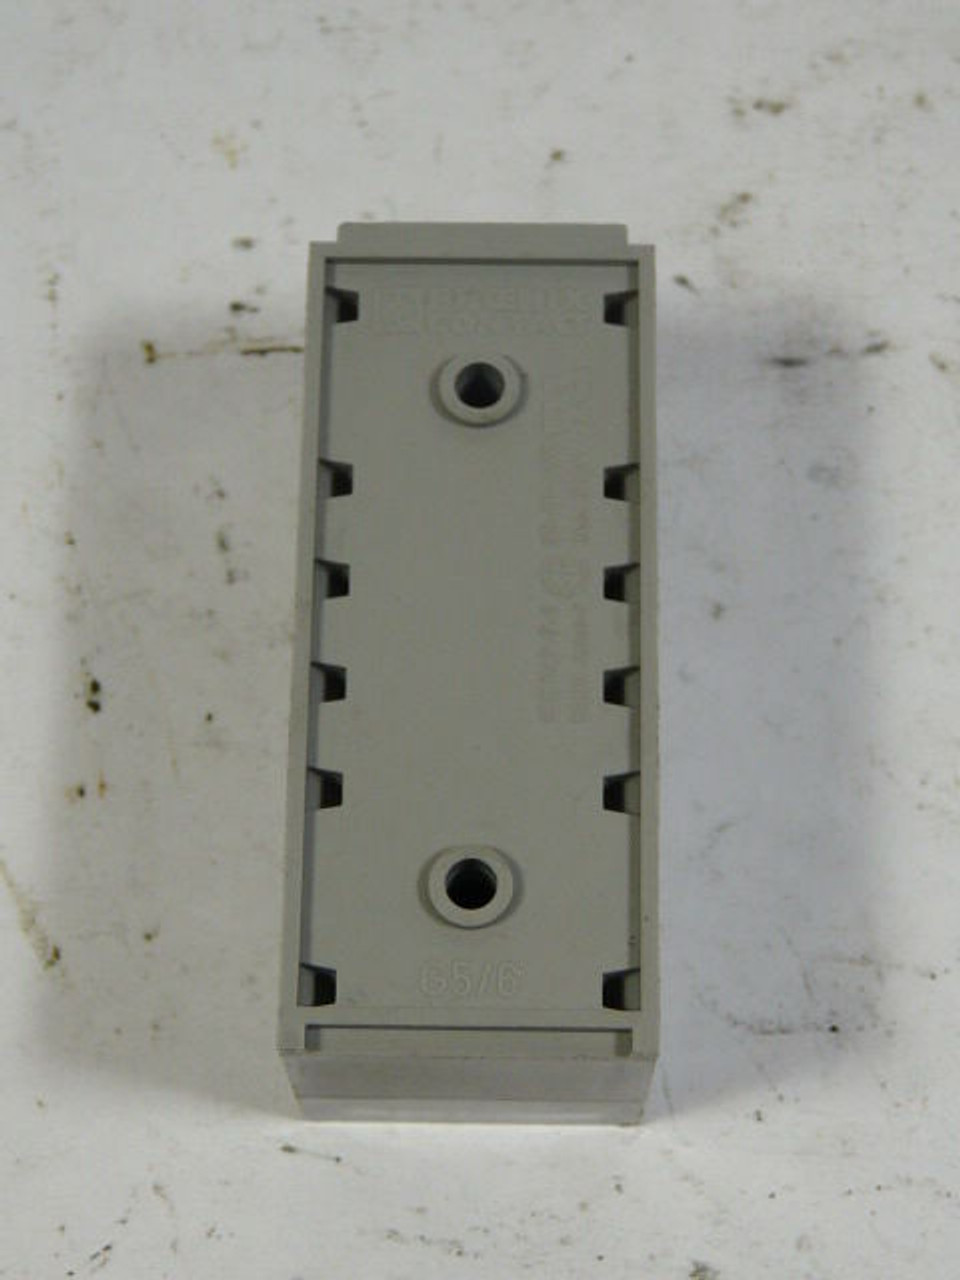 Phoenix Contact G5/6 Terminal Block 6 Position USED